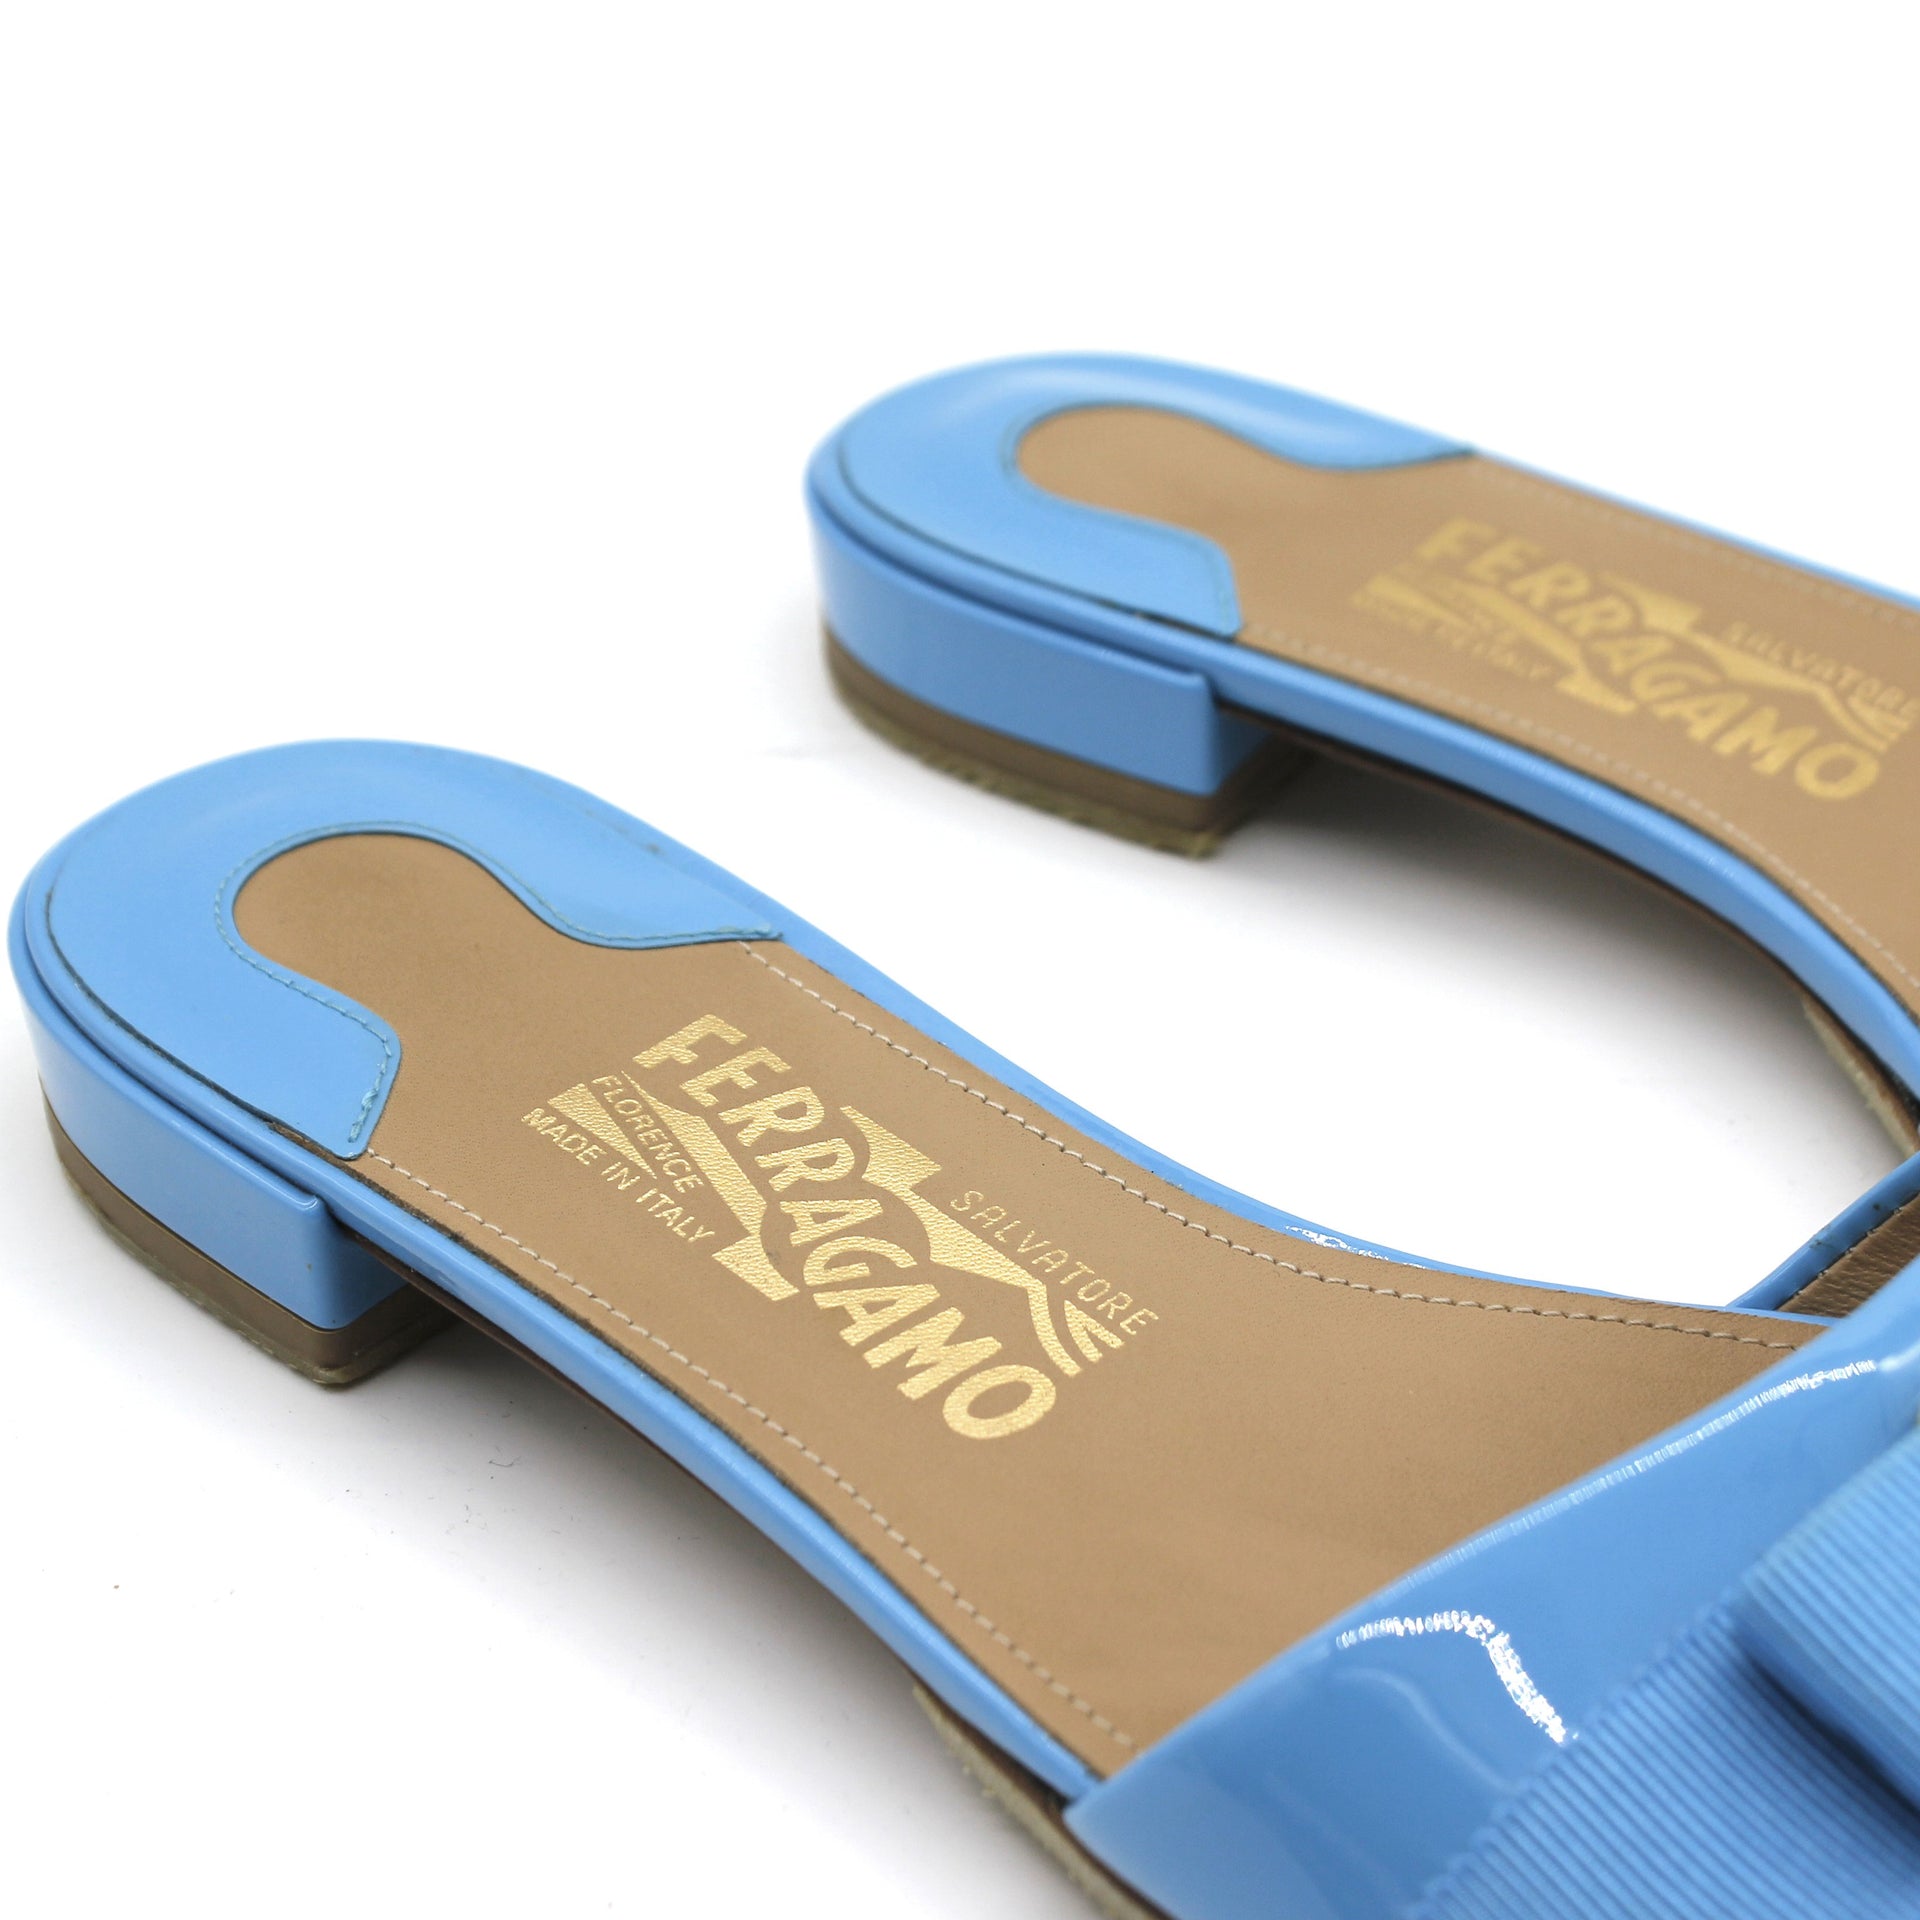 Vara Bow Sandal in Turquoise Patent